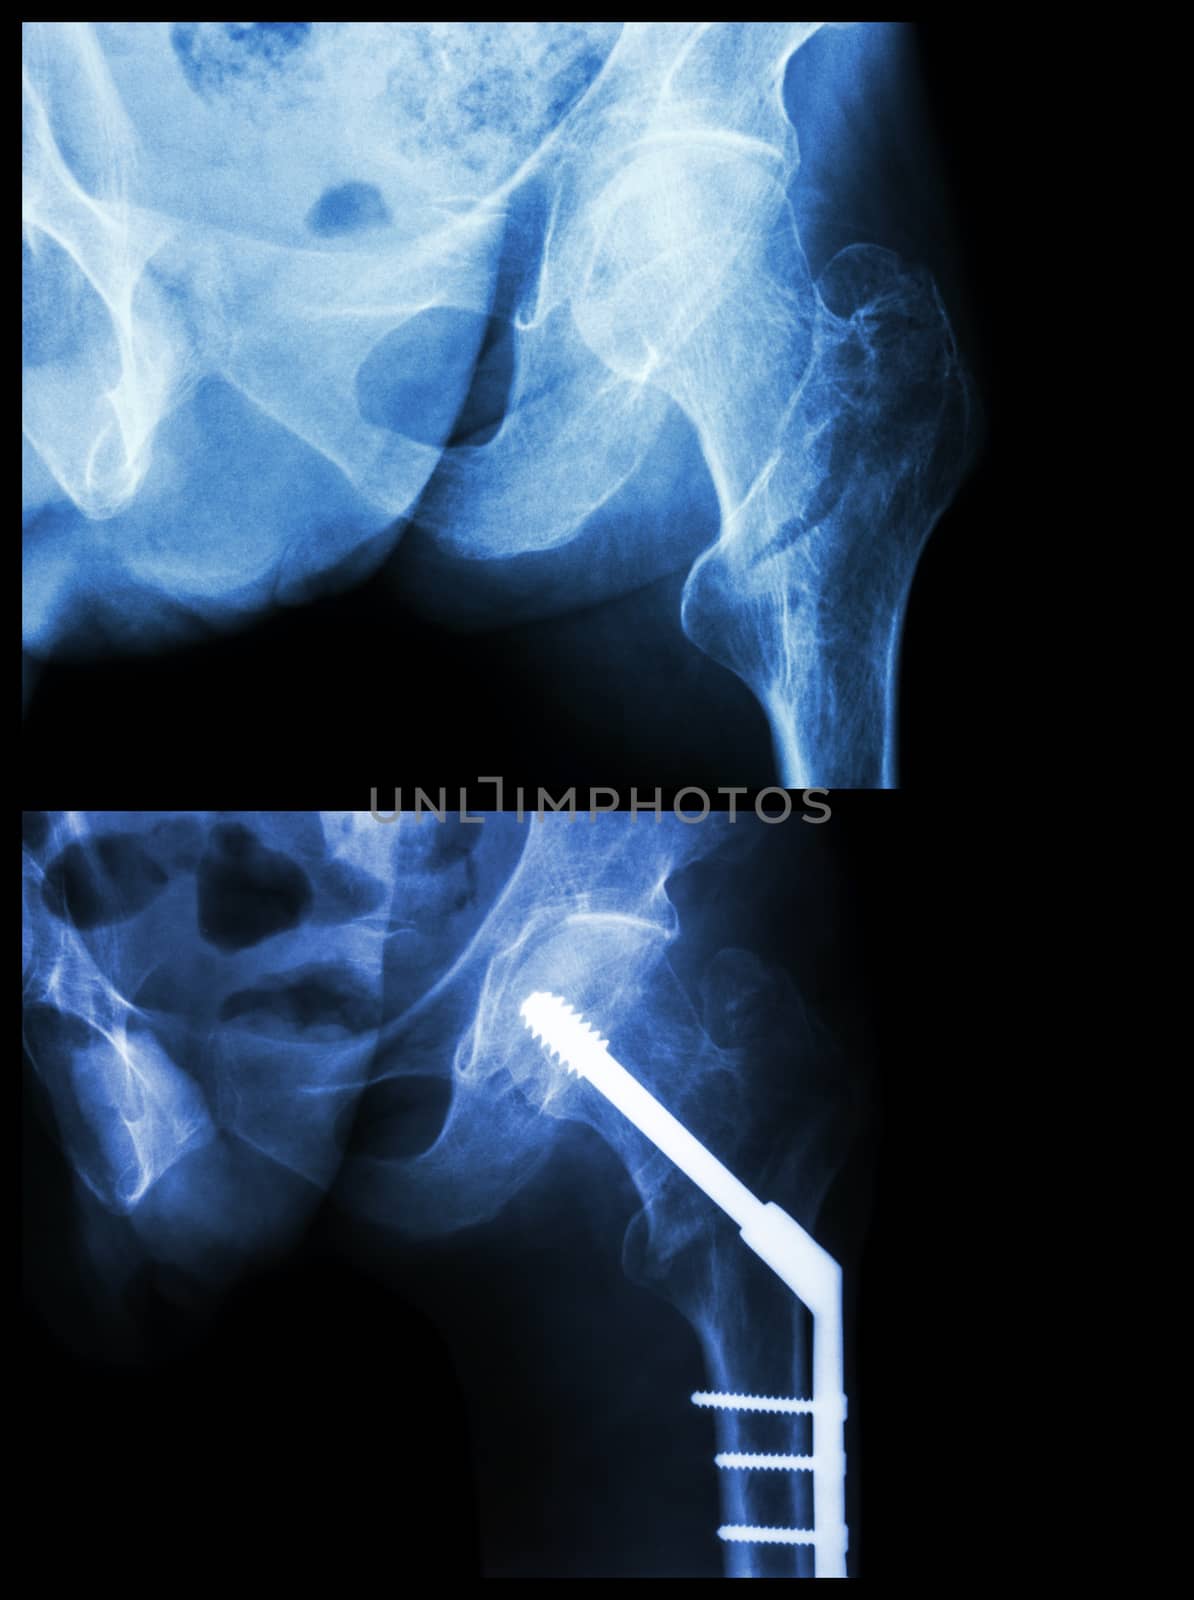 Intertrochanteric fracture left femur (fracture thigh's bone). It was operated and insert intramedullary nail.